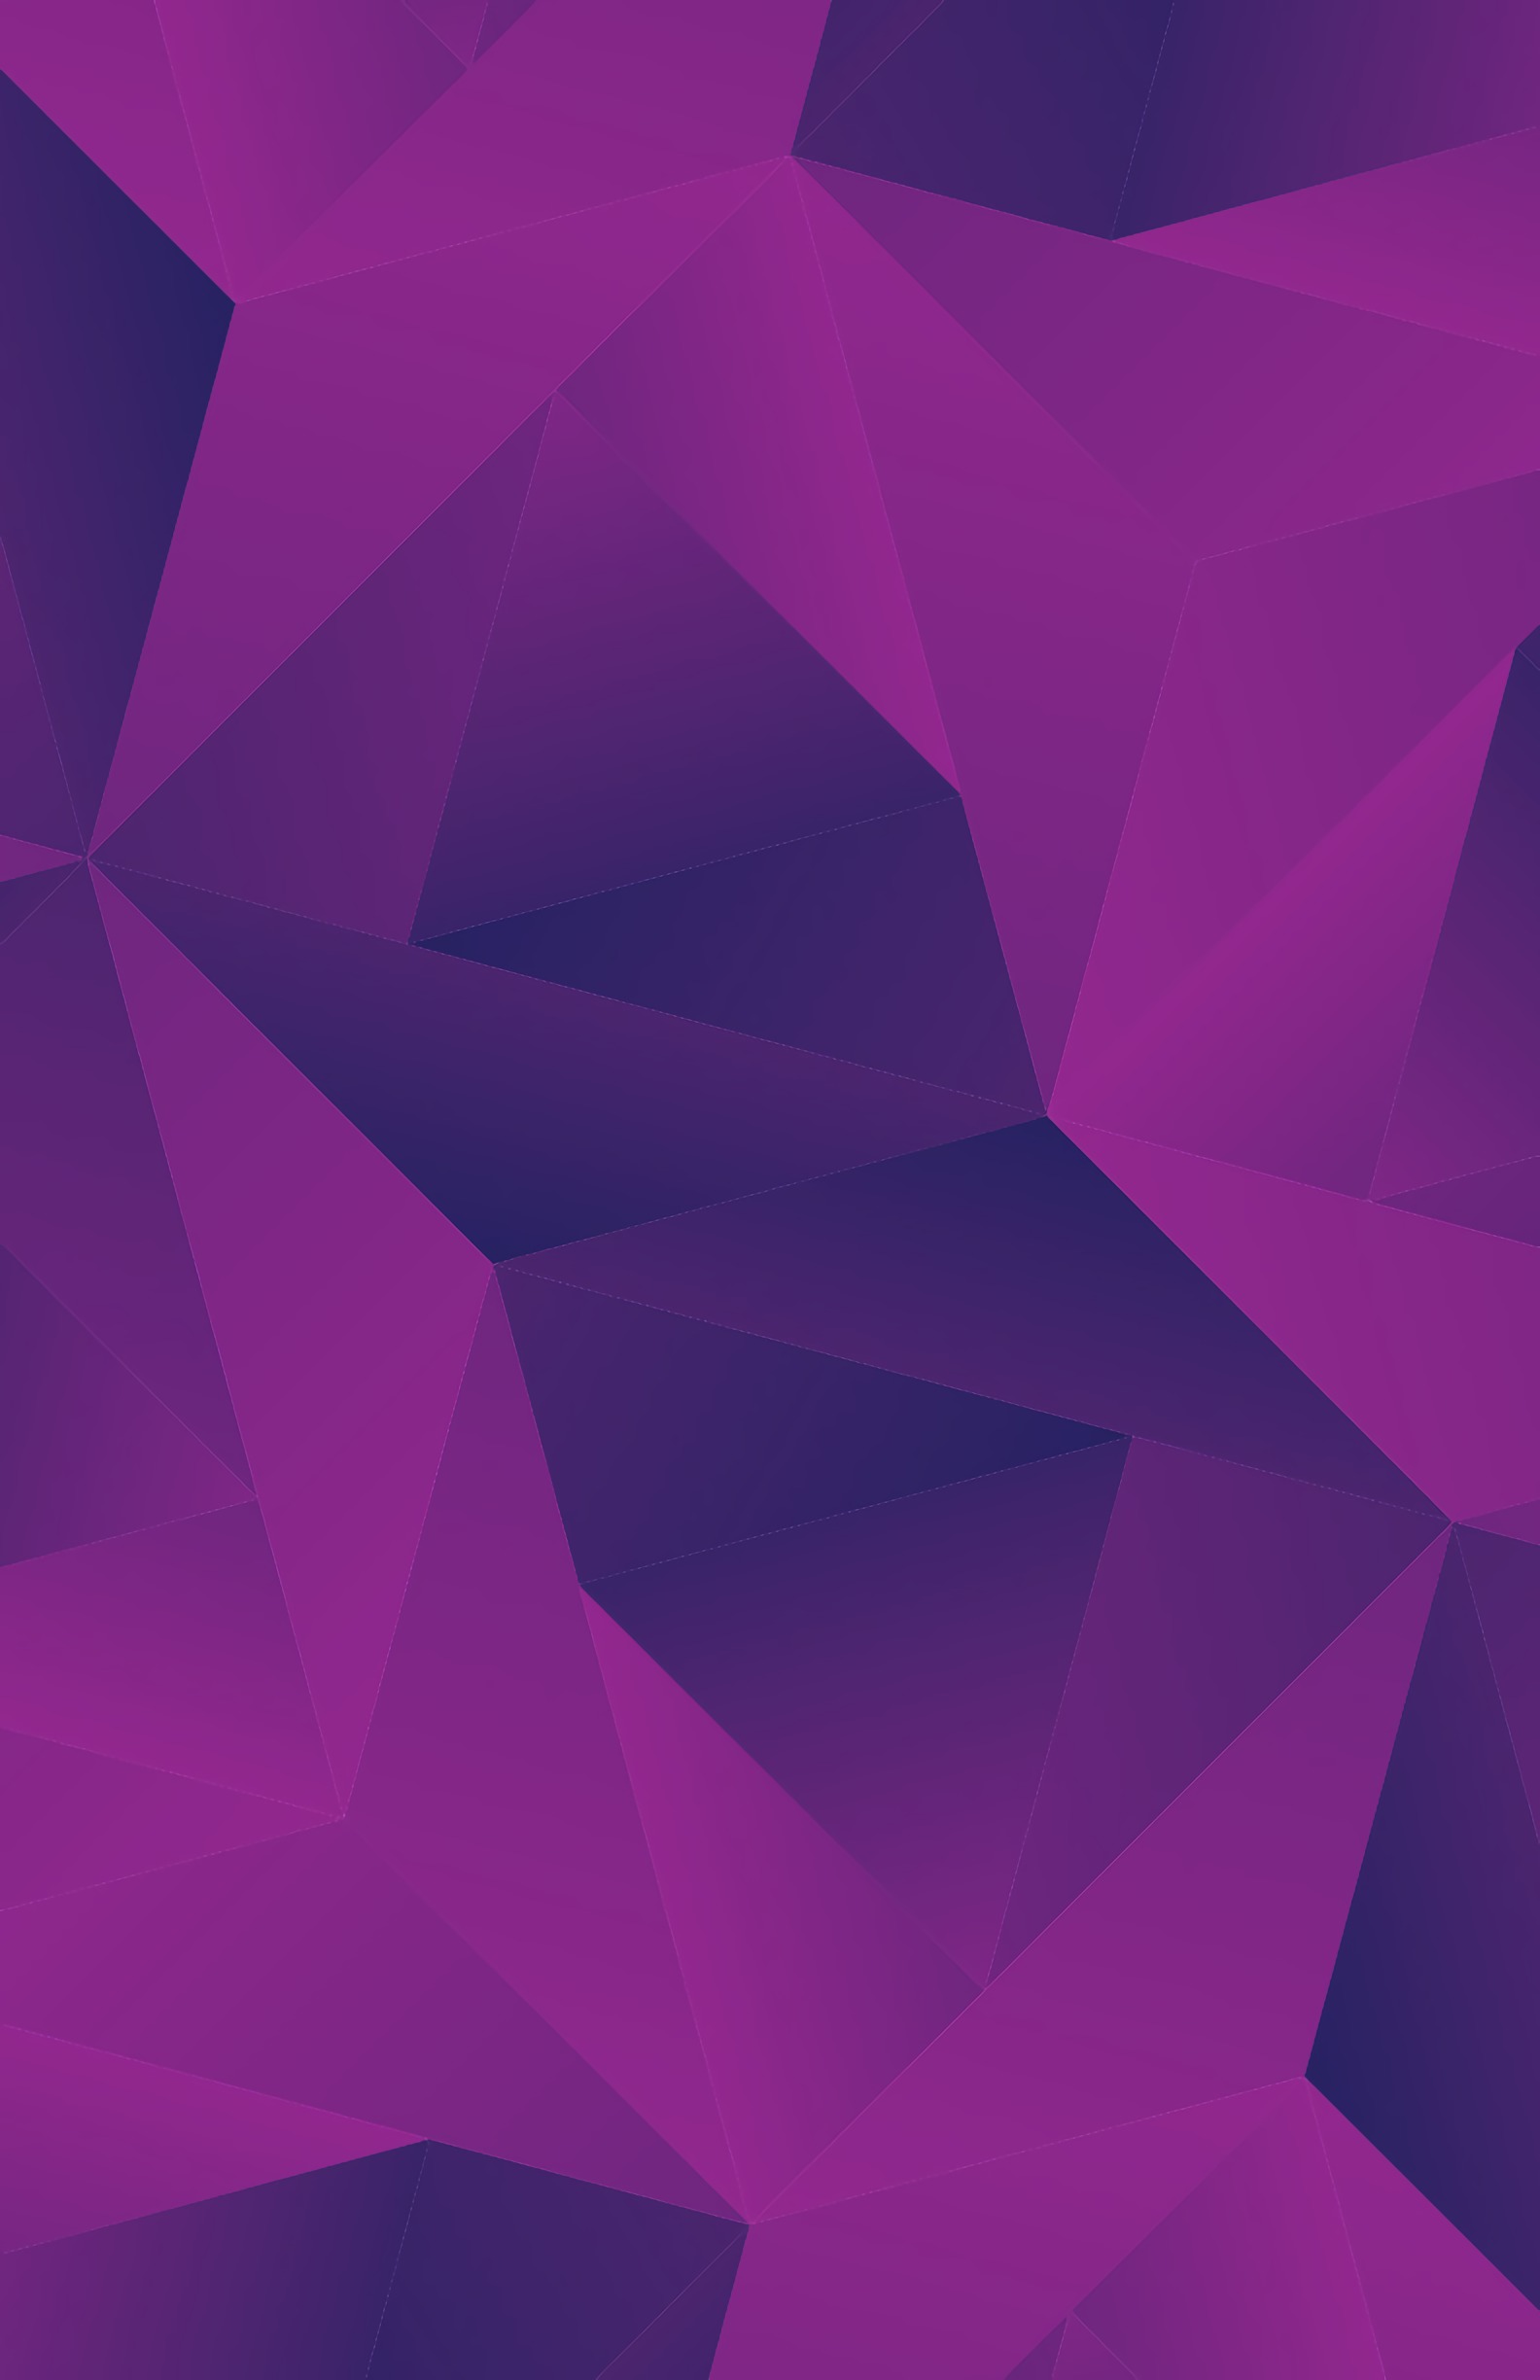 Cool Backgrounds texture, polygon, shades, gradient Purple